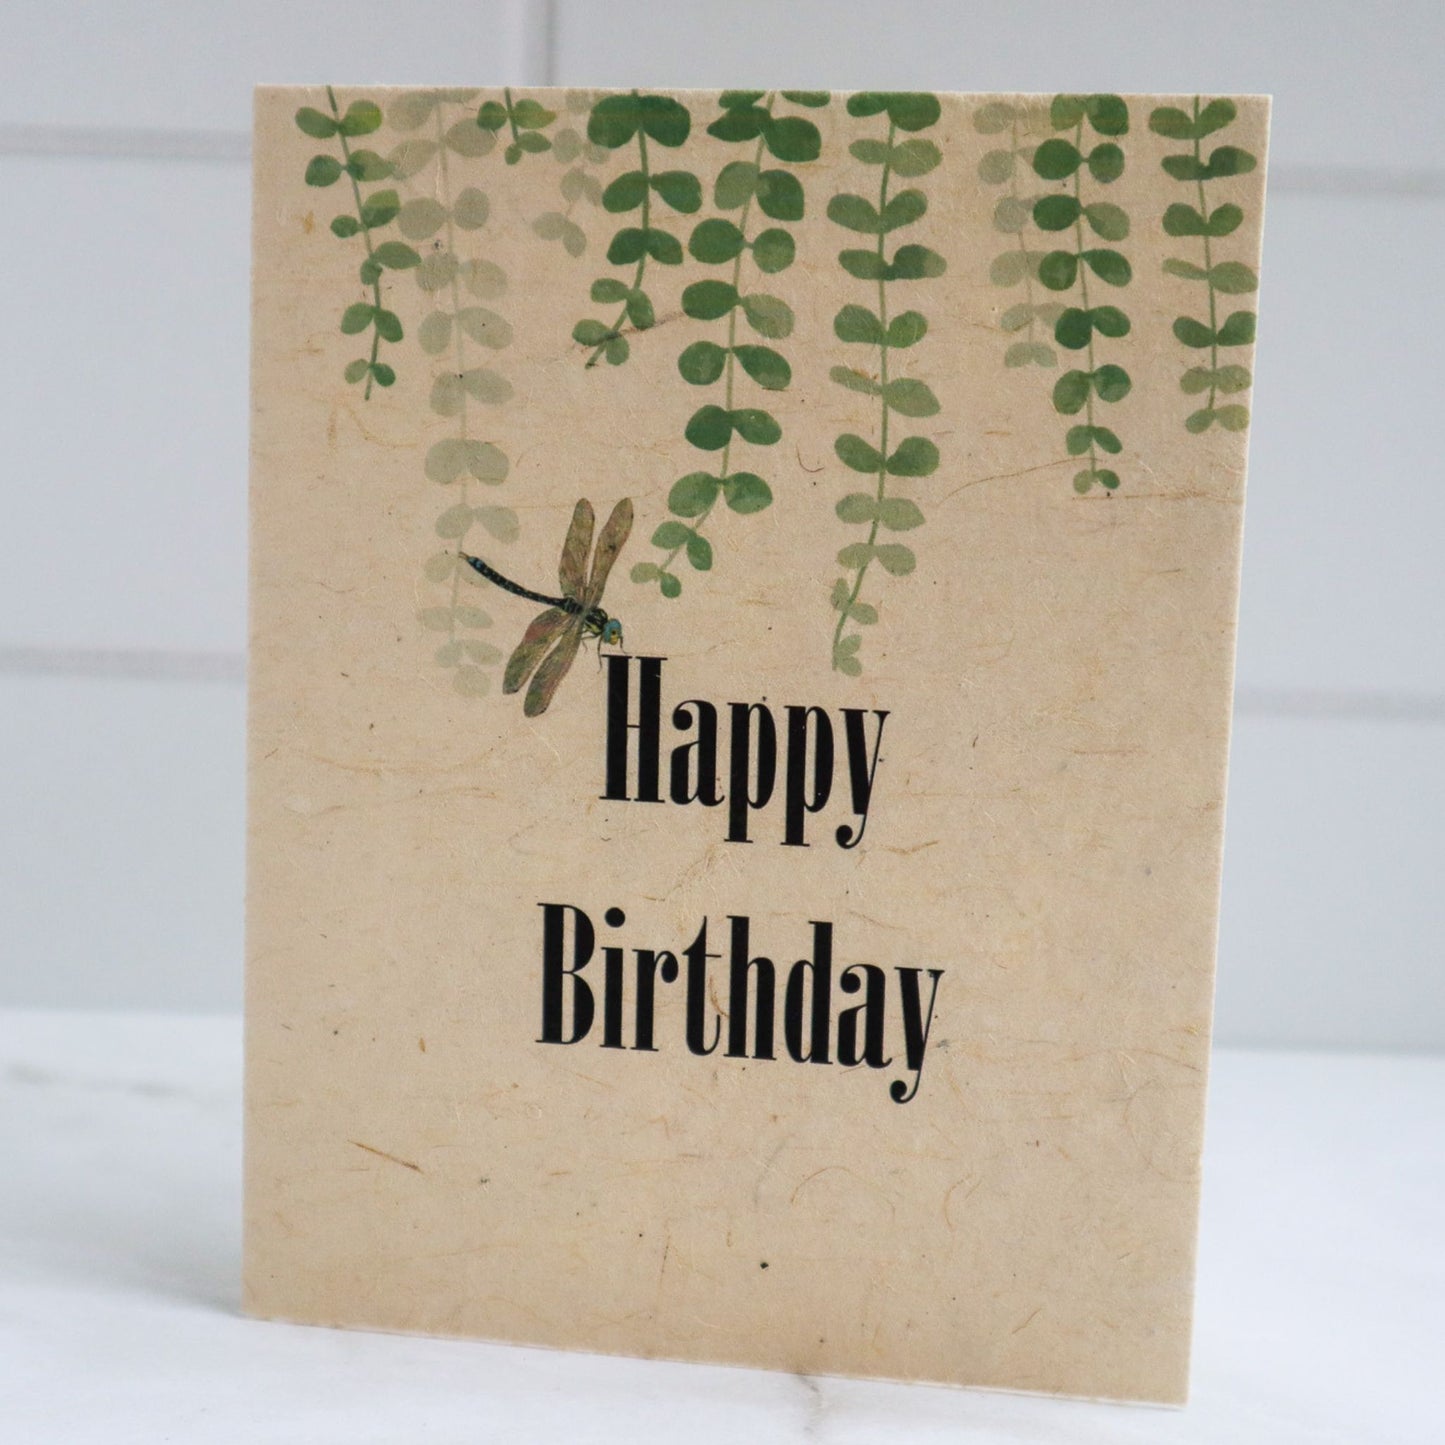 Plantable seed paper birthday card with dragonfly and greenery. Helen Jeanne Handmade card.